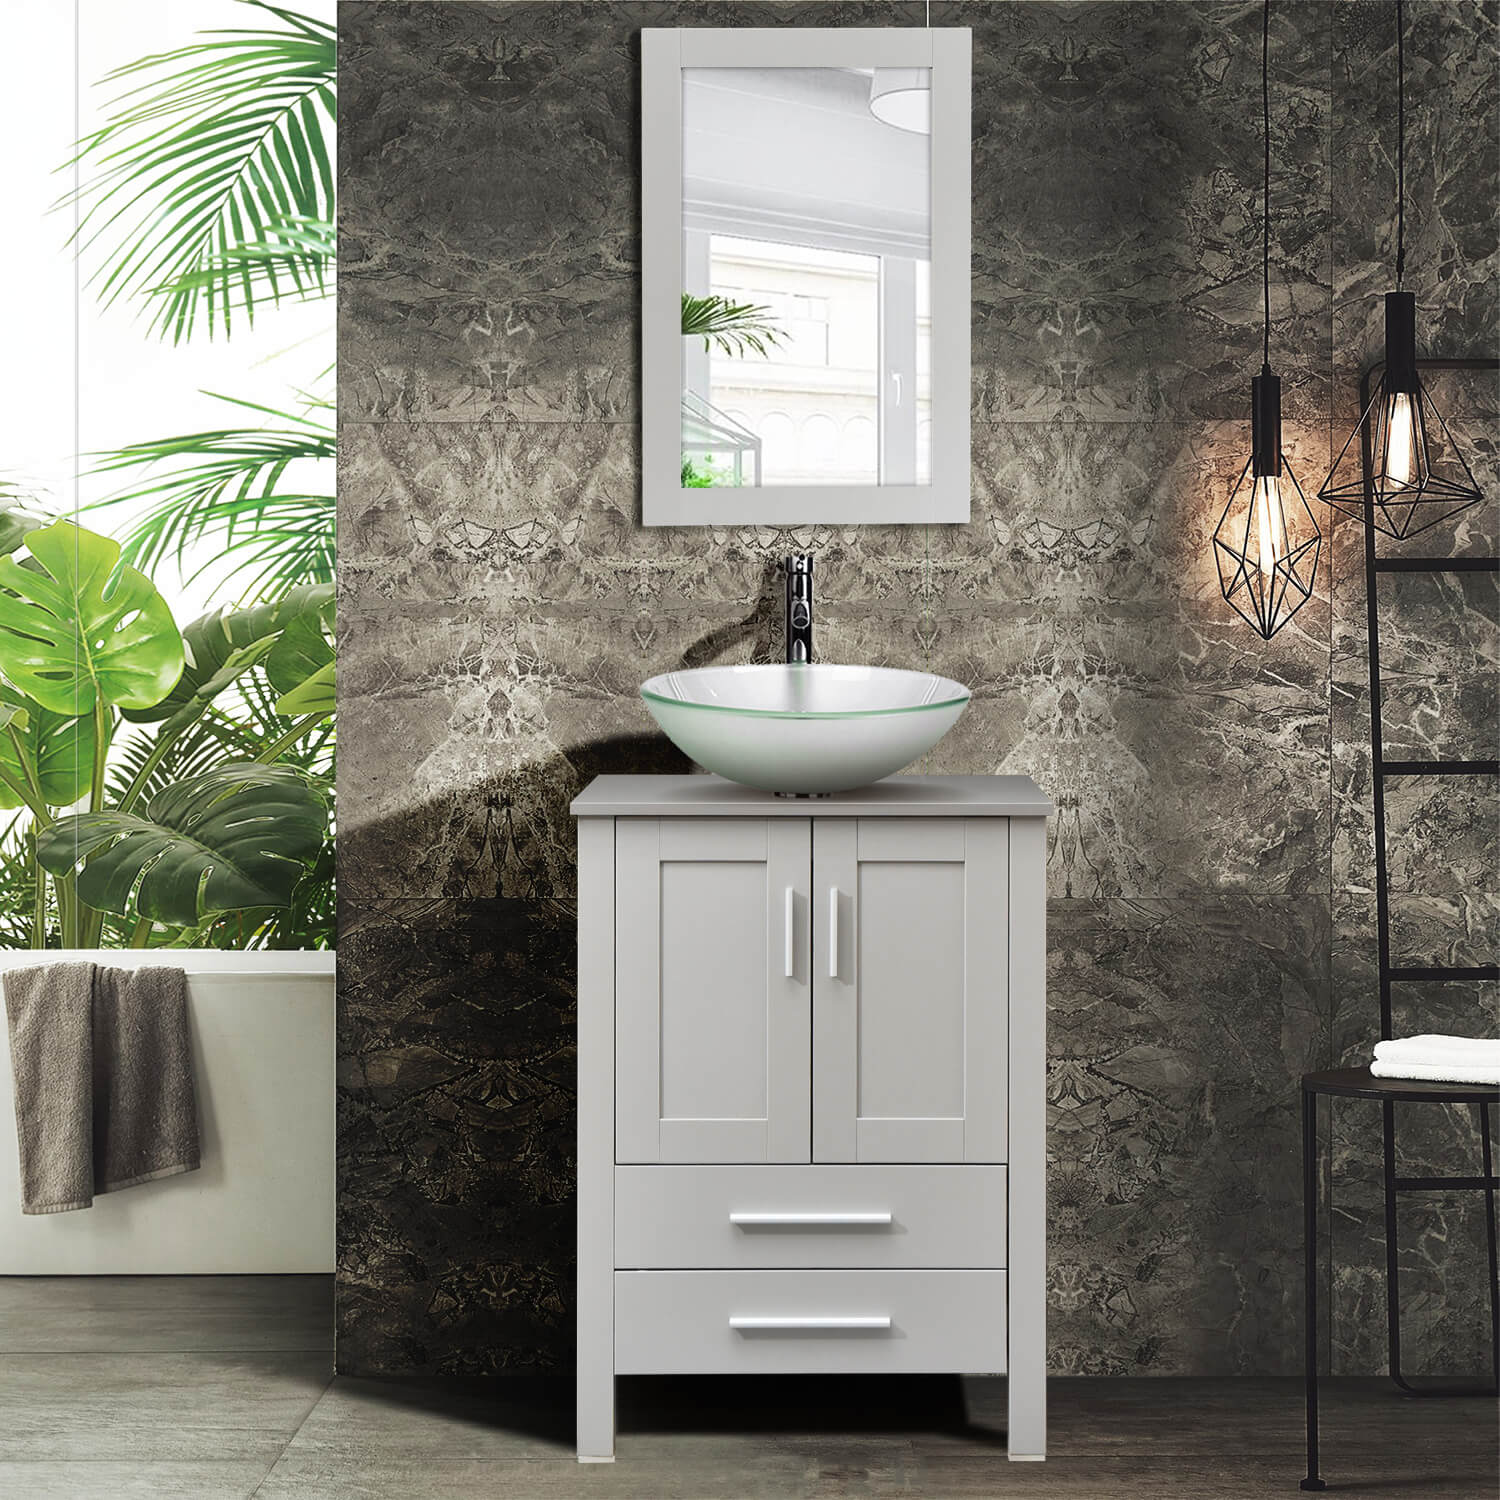 Elecwish gray wood bathroom vanity with frosted glass sink BA20103 in bathroom